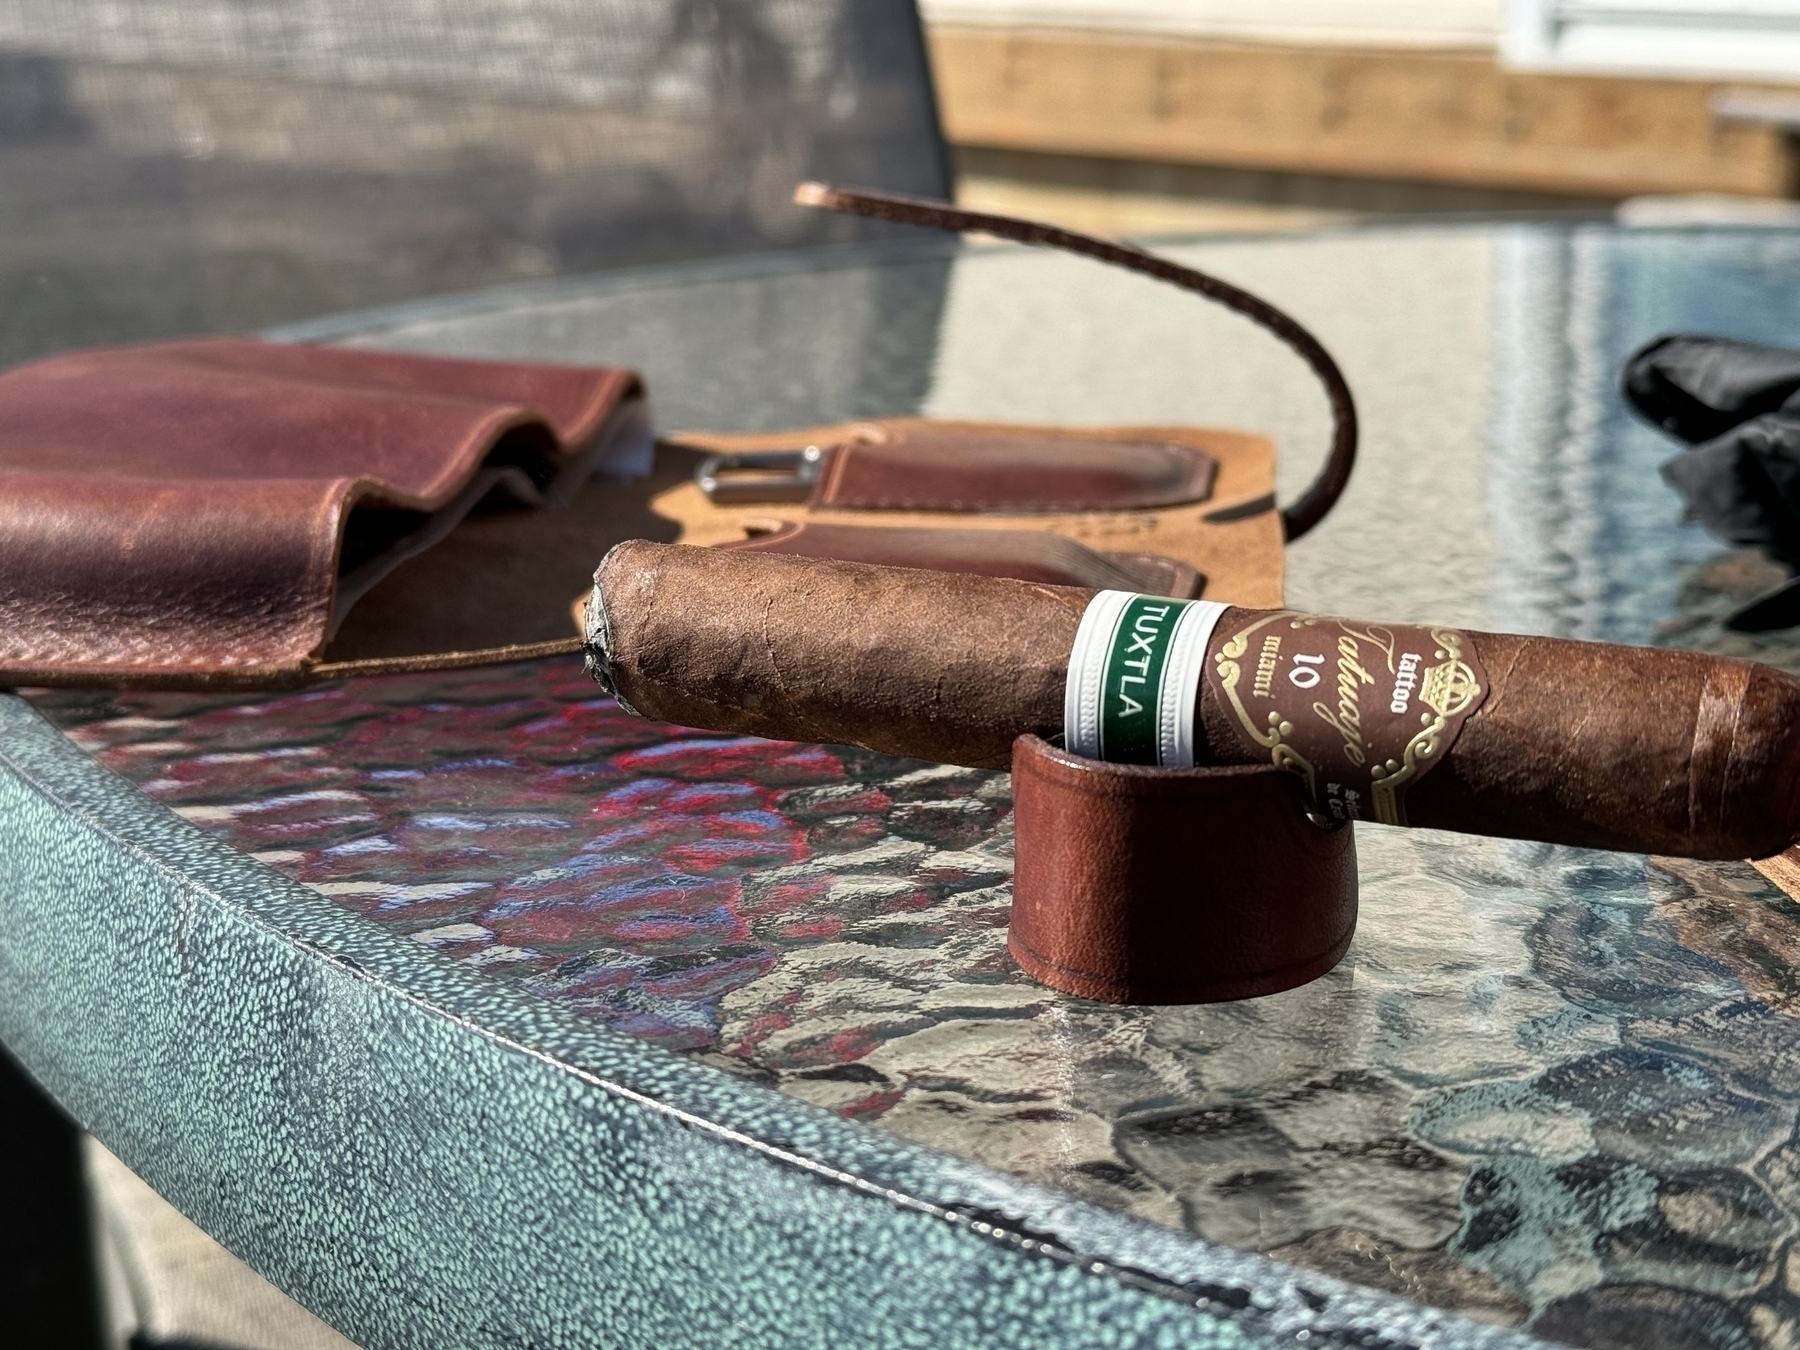 Tatuaje cigar on a handcrafted leather cigar stand in the foreground. Handcrafted leather cigar case seen in the background. 